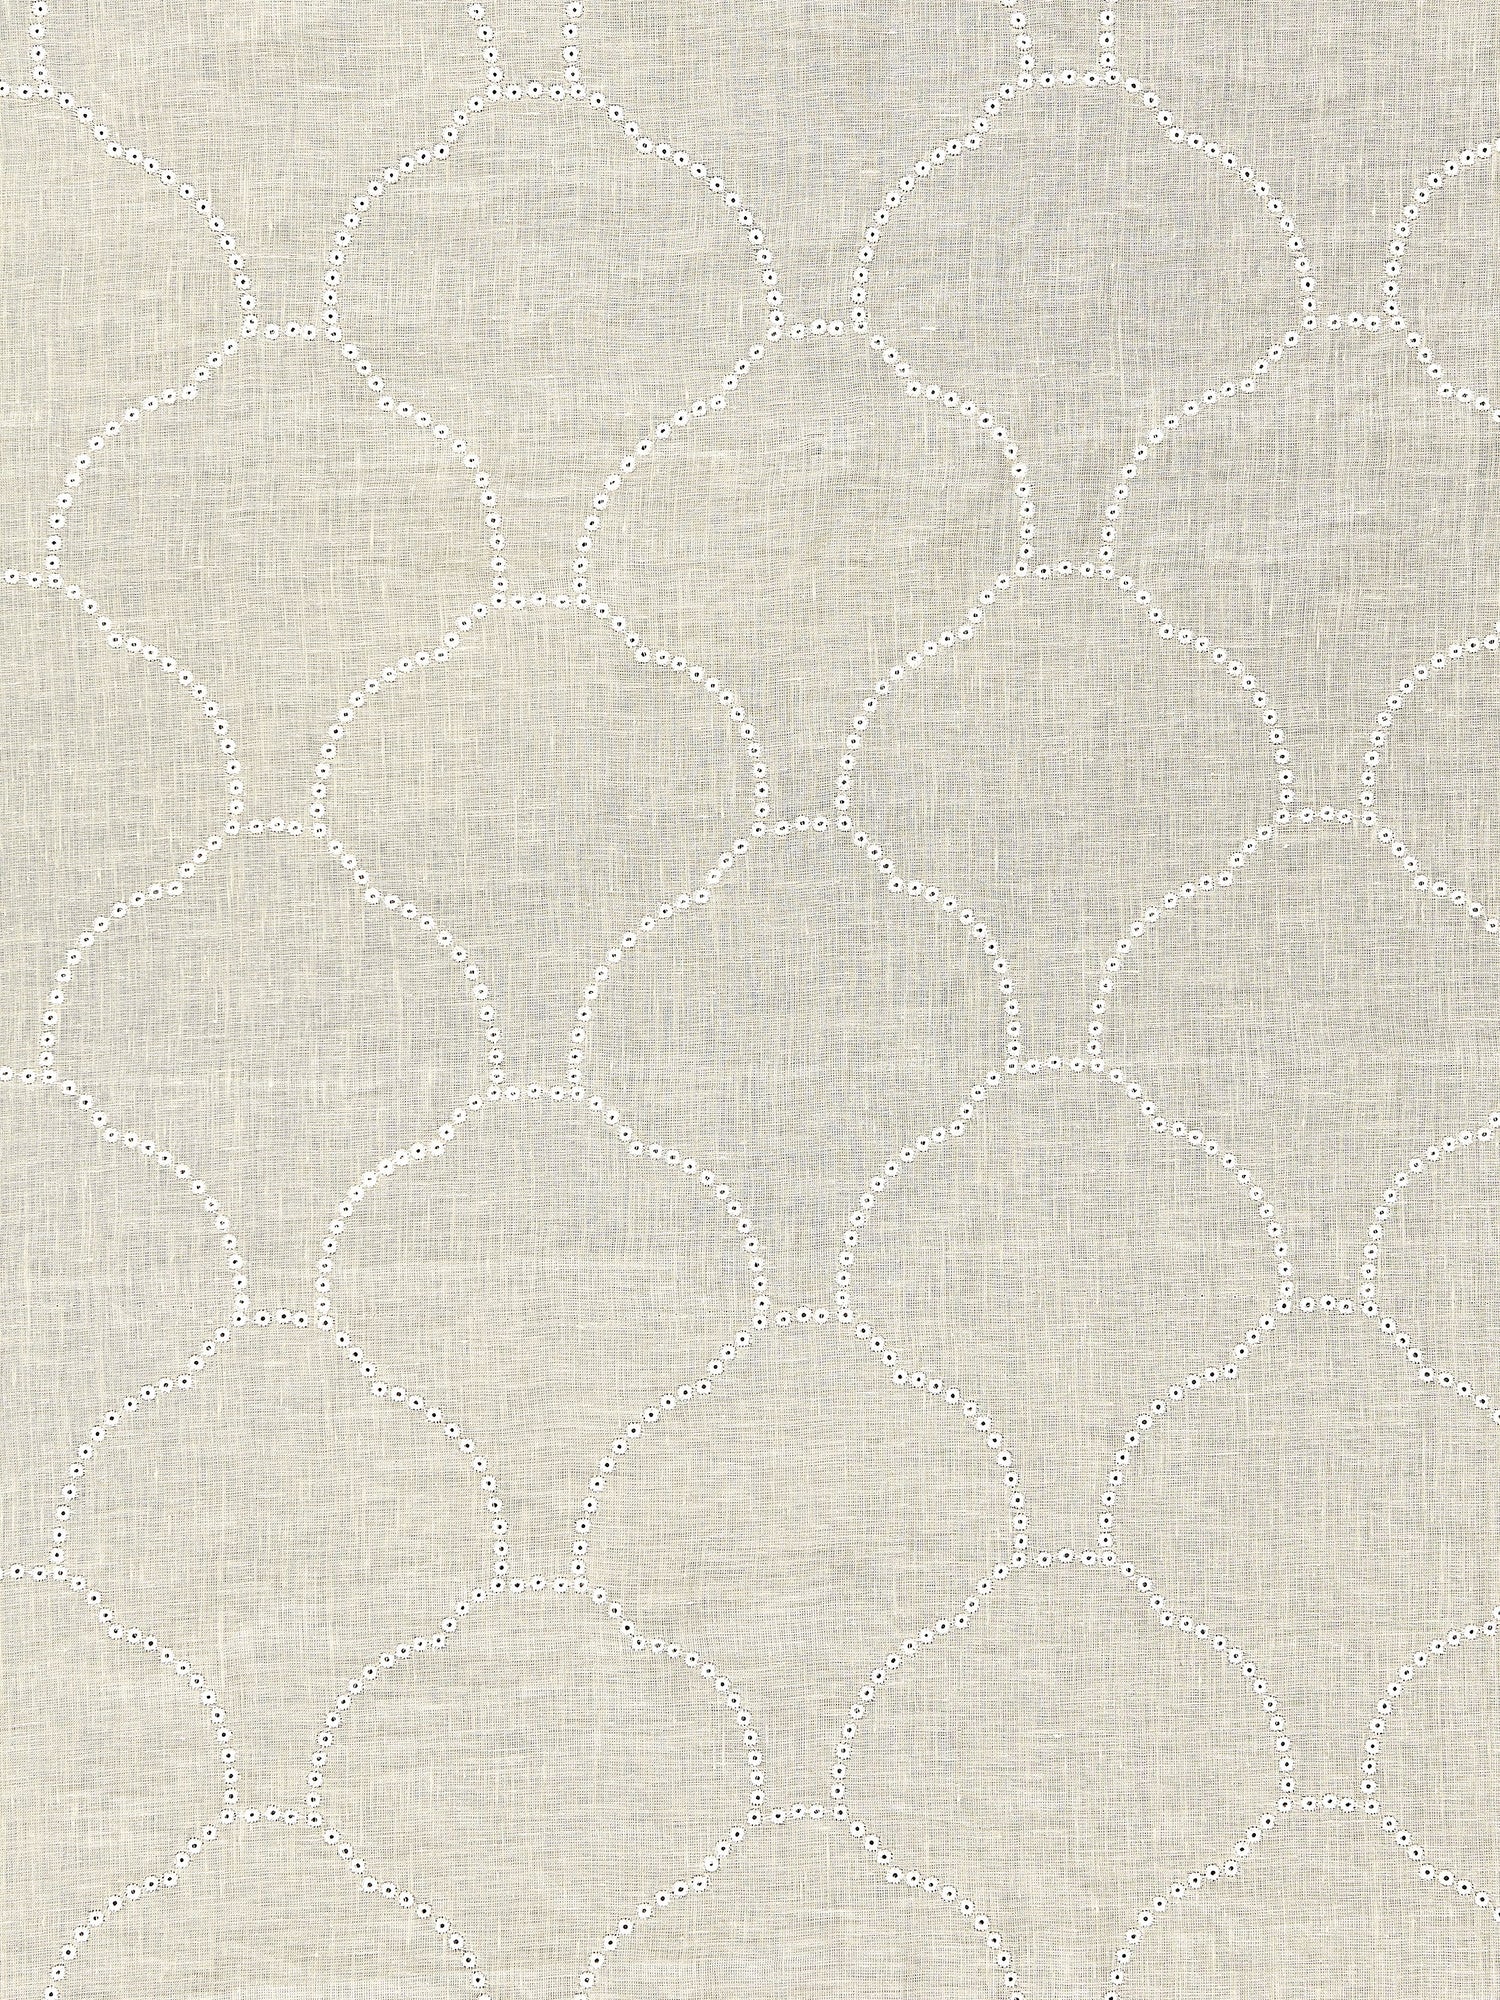 Coquille Sheer fabric in flax color - pattern number SC 000227038 - by Scalamandre in the Scalamandre Fabrics Book 1 collection